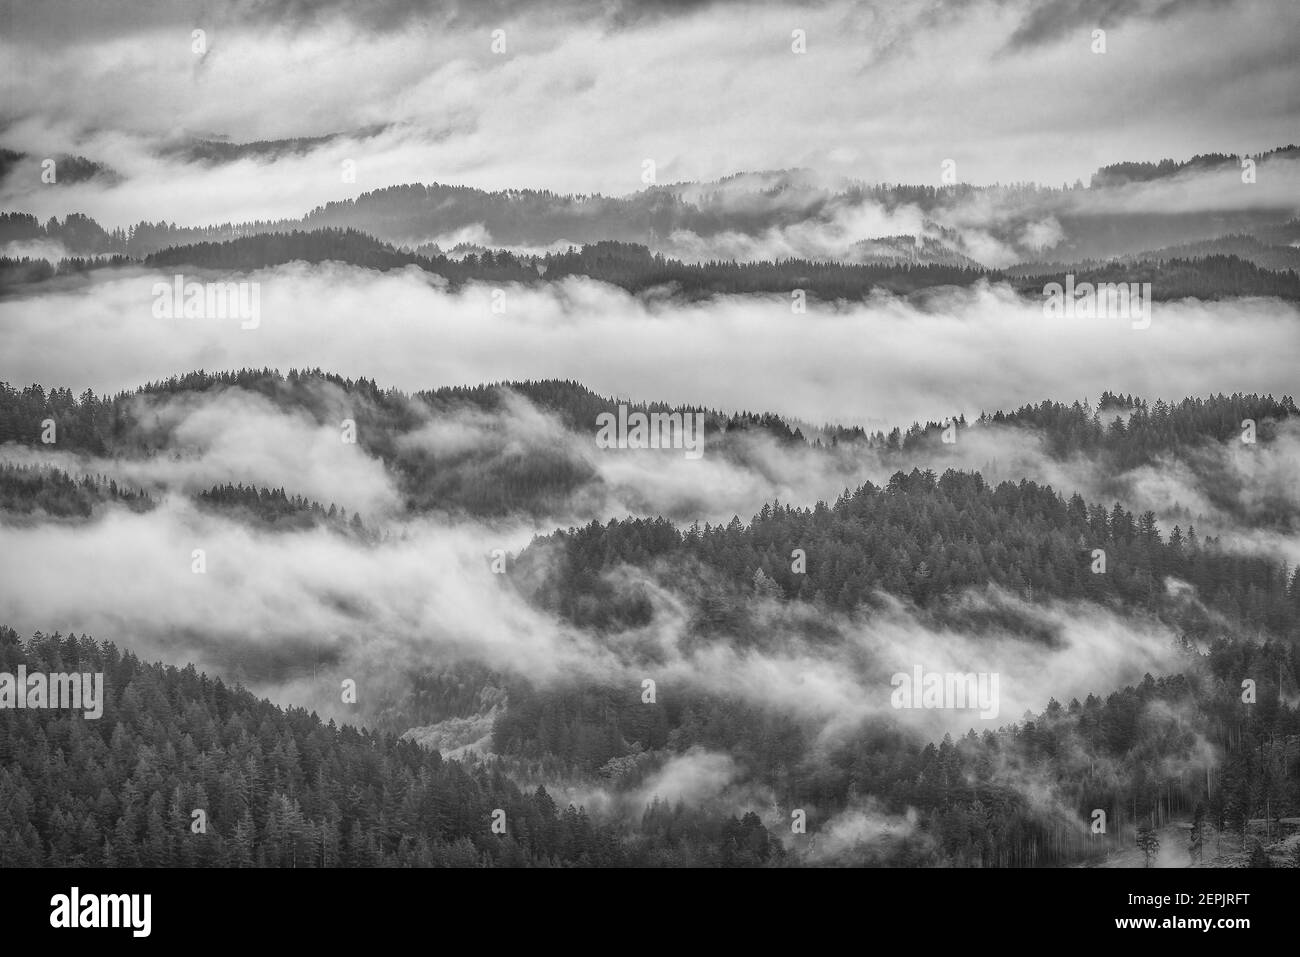 Fog in the forest of the Coast Range Mountains, Siuslaw National Forest, Central Oregon Coast. Stock Photo